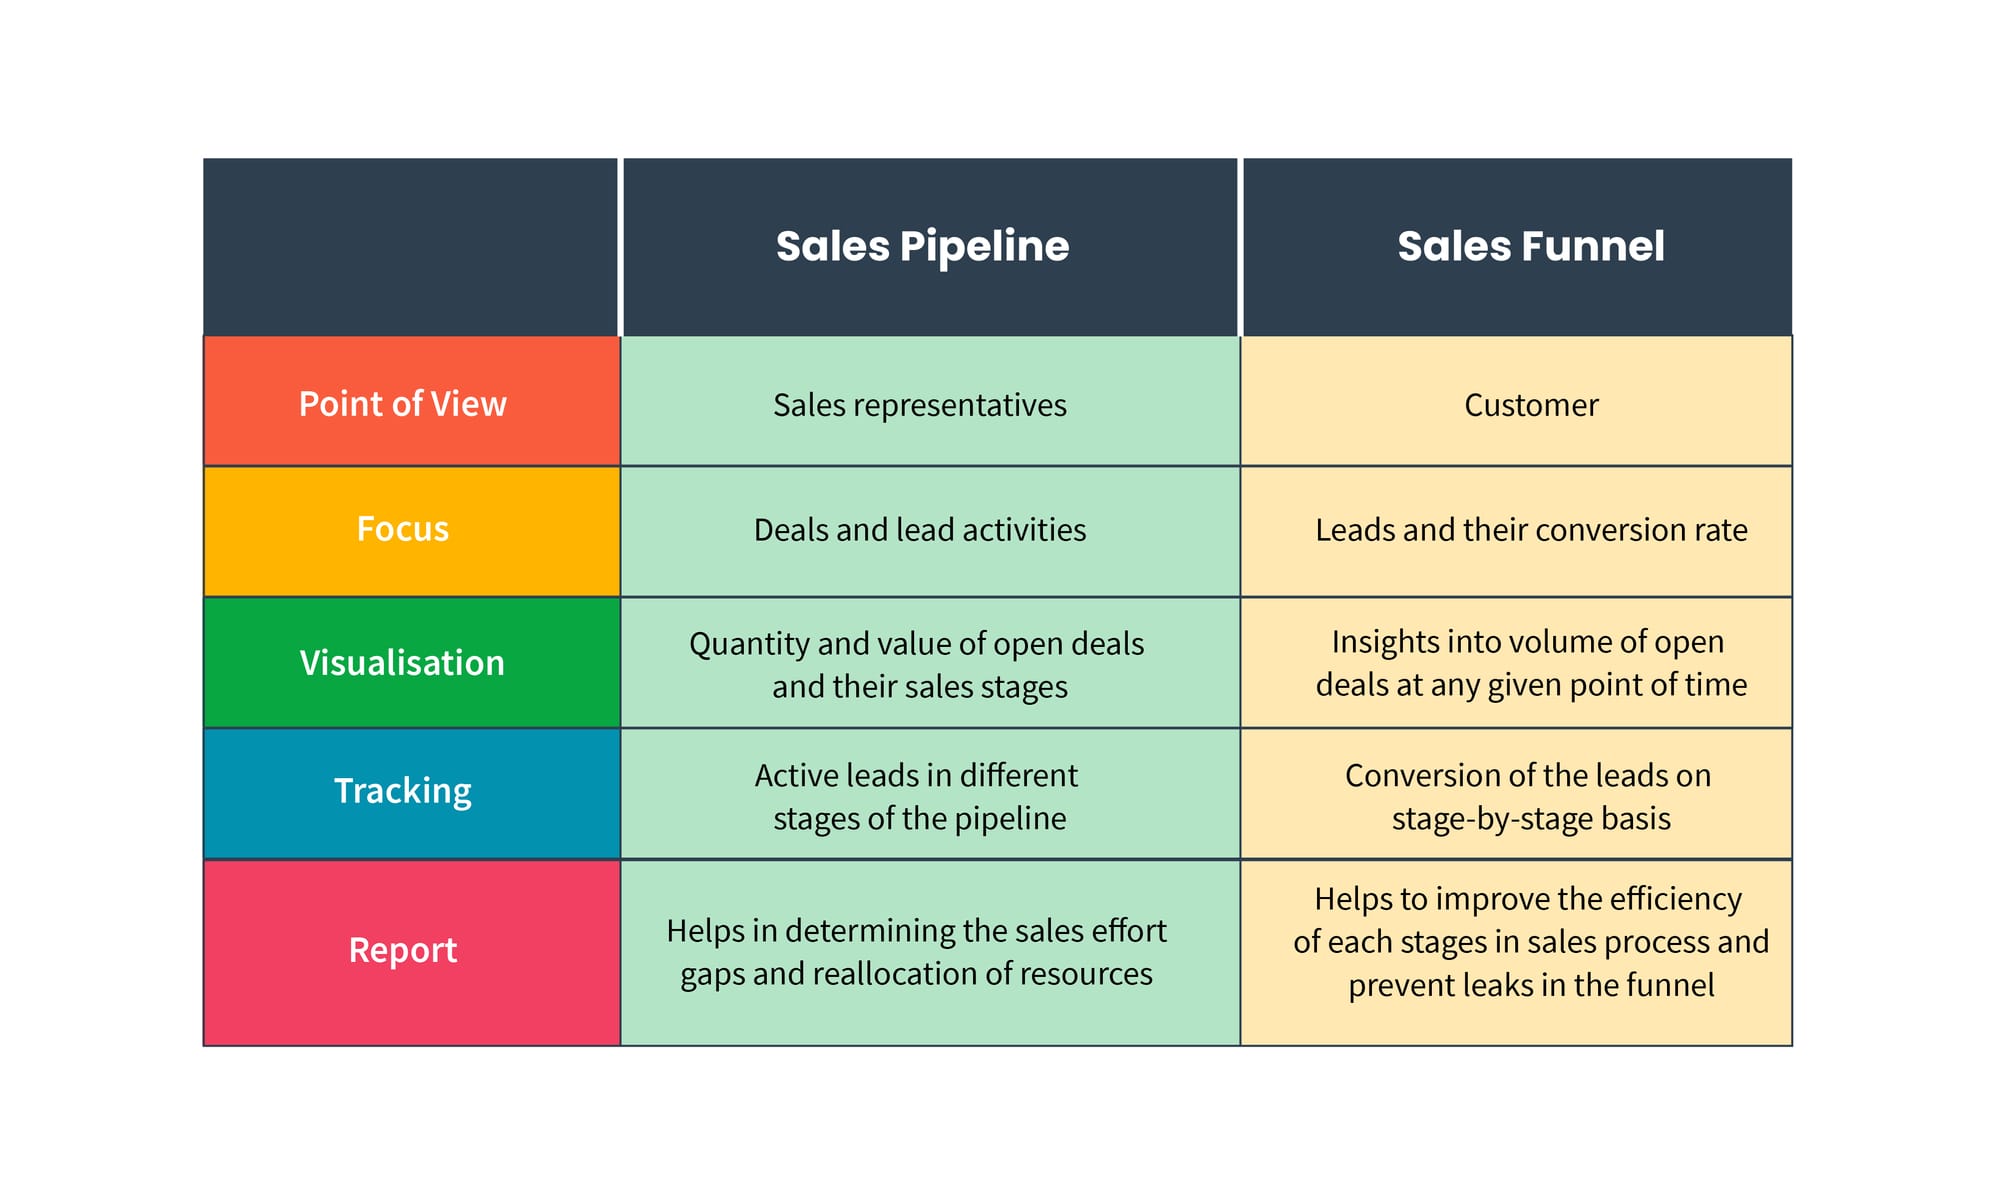 Difference between a sales pipeline and a sales funnel